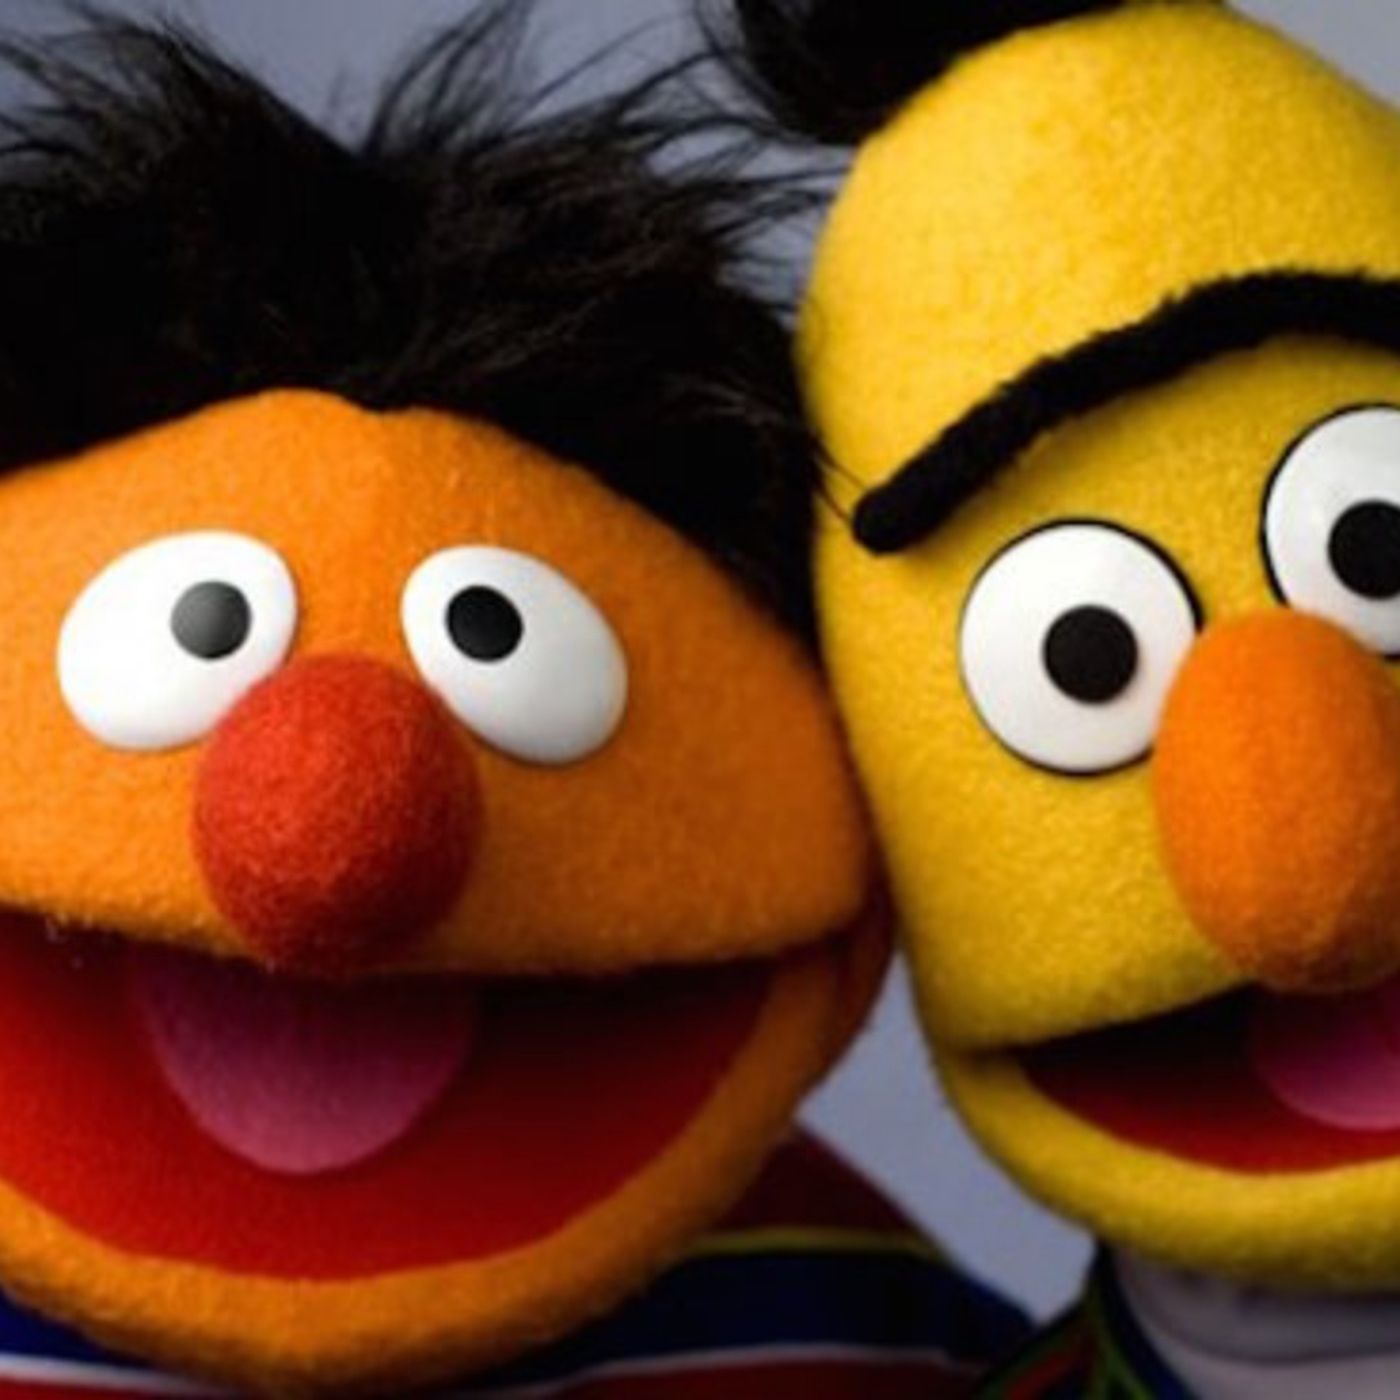 Why it matters that Bert and Ernie are gay, which they are